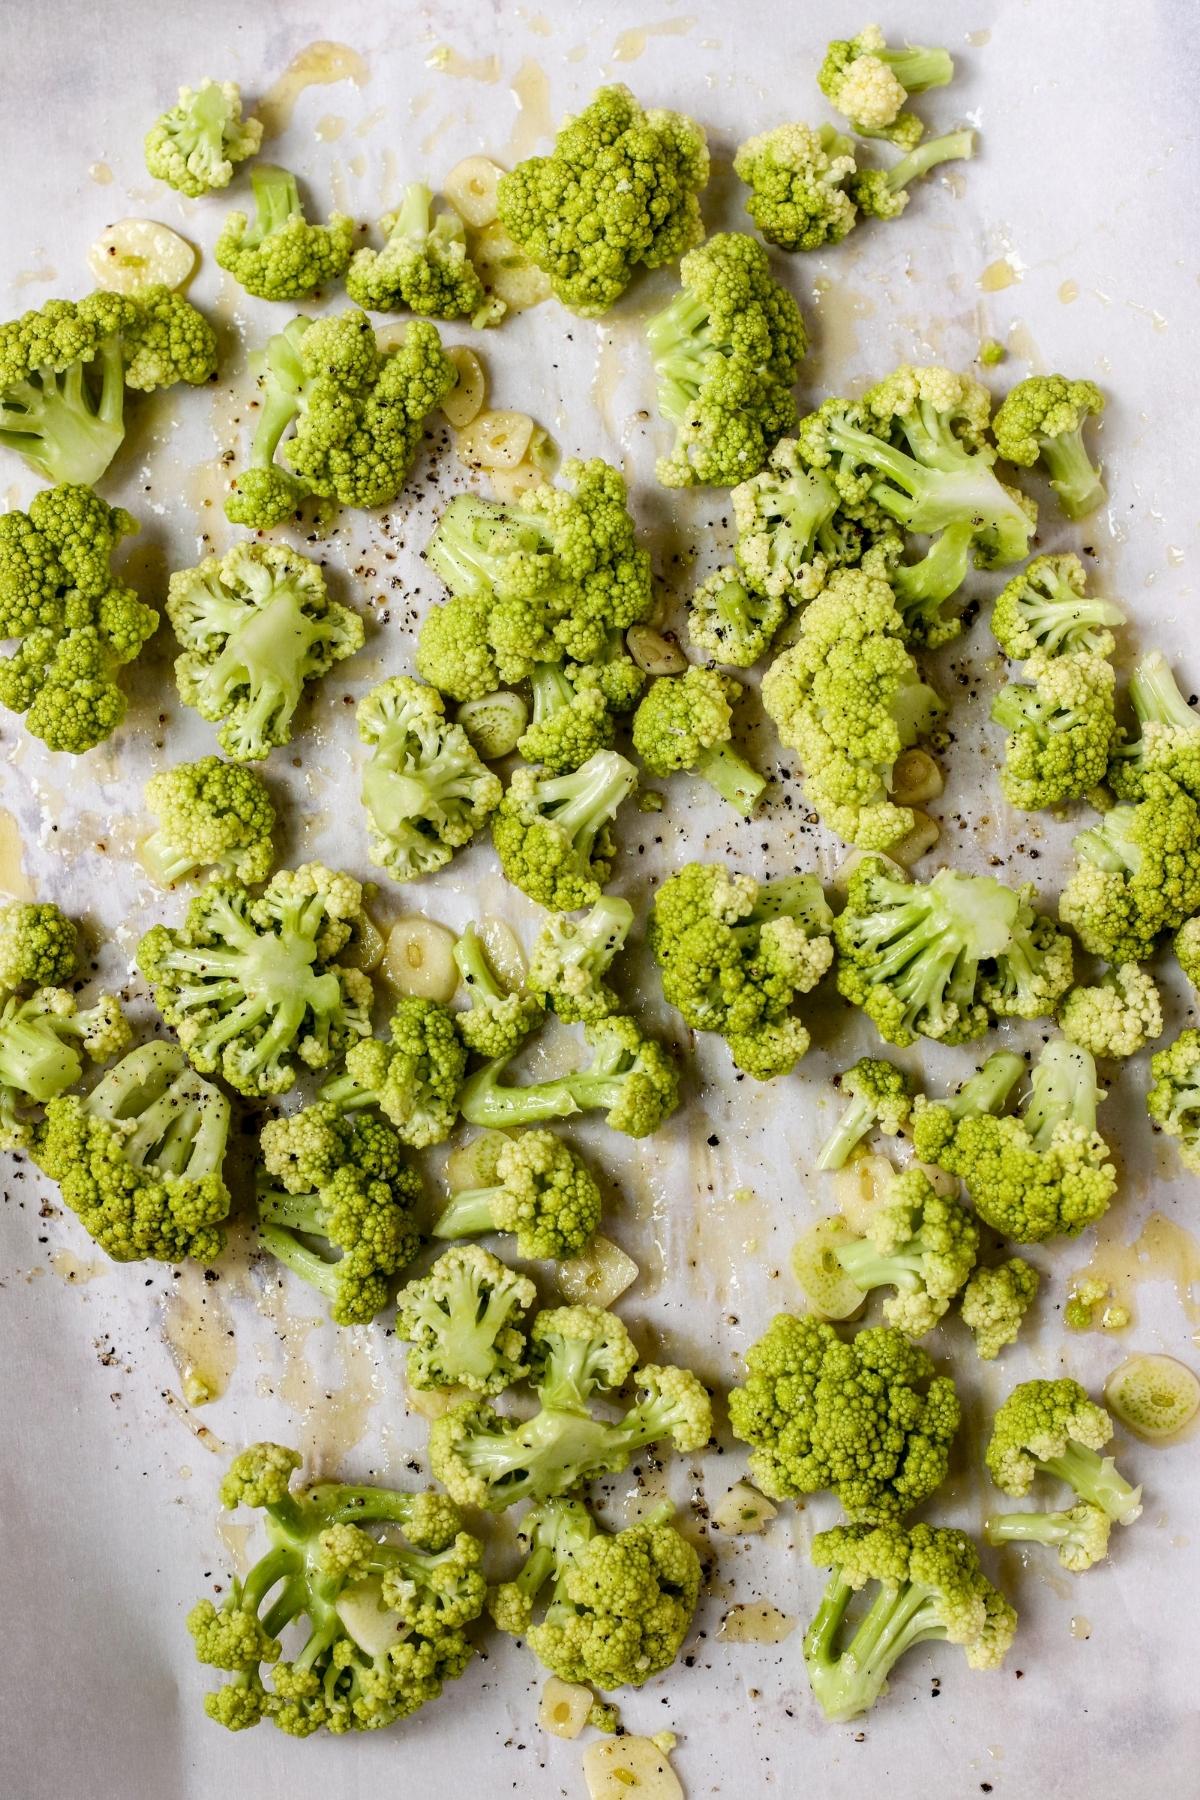 Romanesco florets and garlic slices on a parchment paper lined baking sheet.